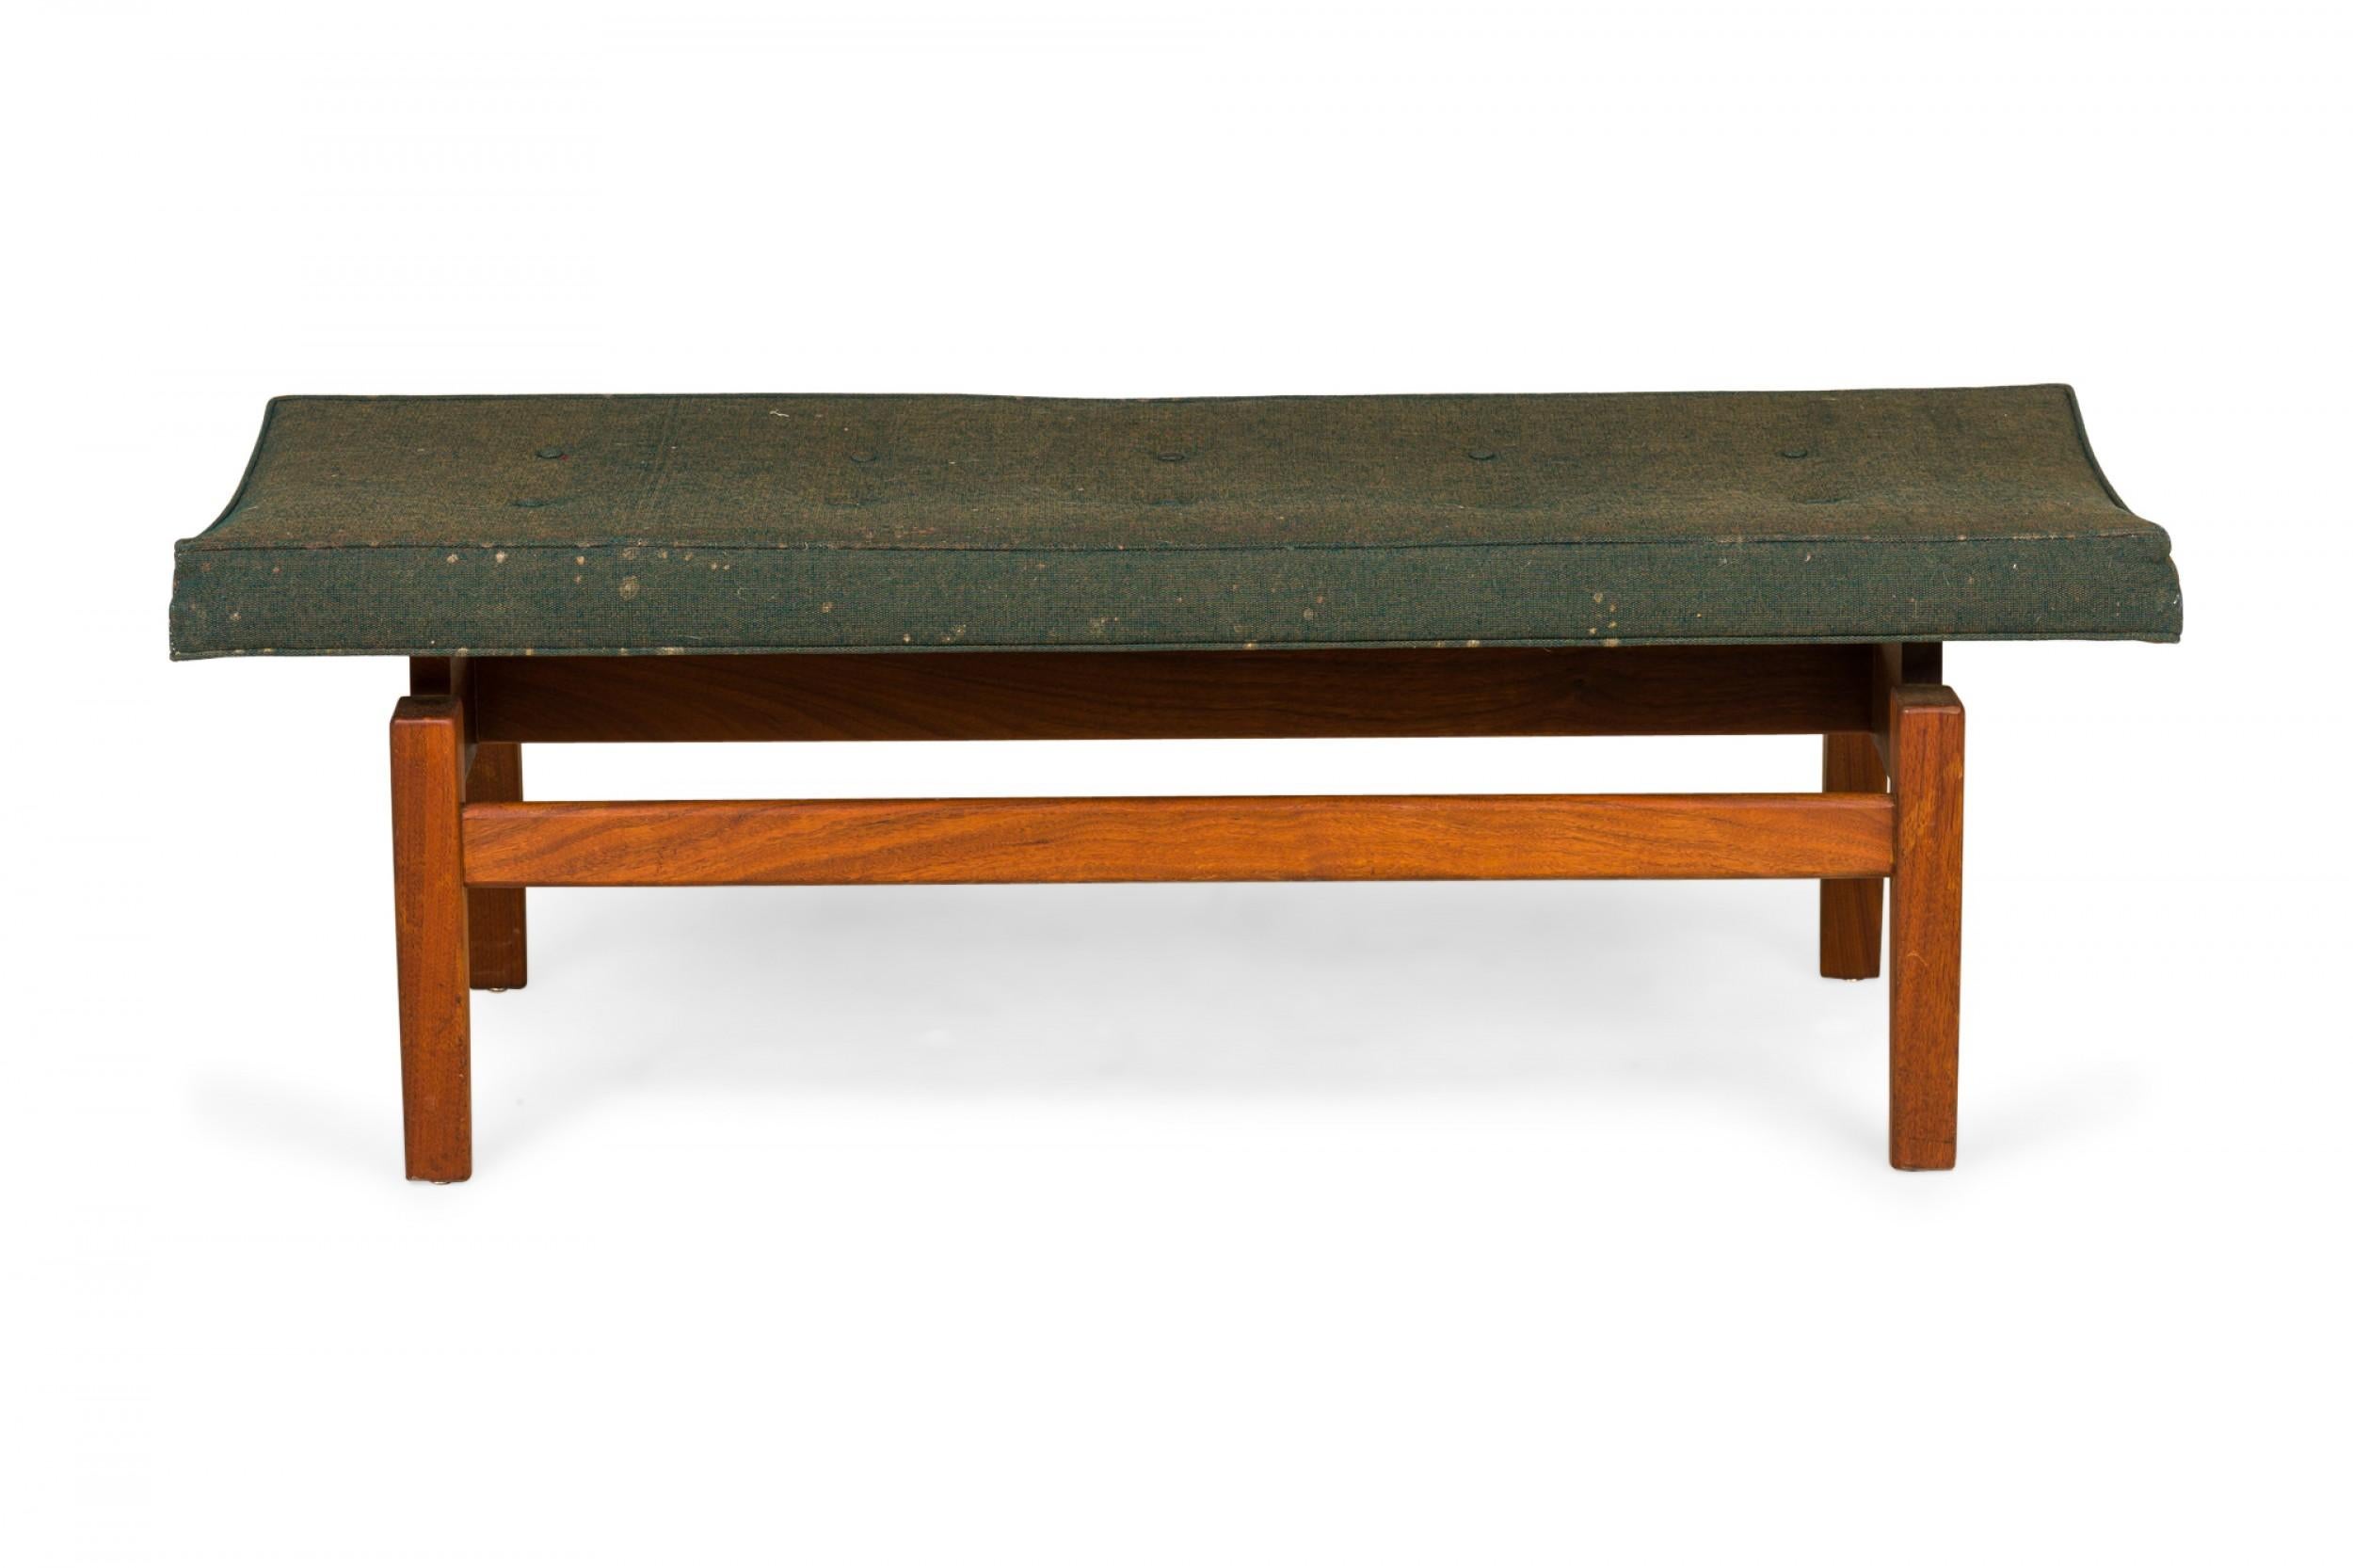 Danish Mid-Century rectangular floating bench with a green fabric upholstered seat resting on a wooden floating frame base. (JENS RISOM).
 